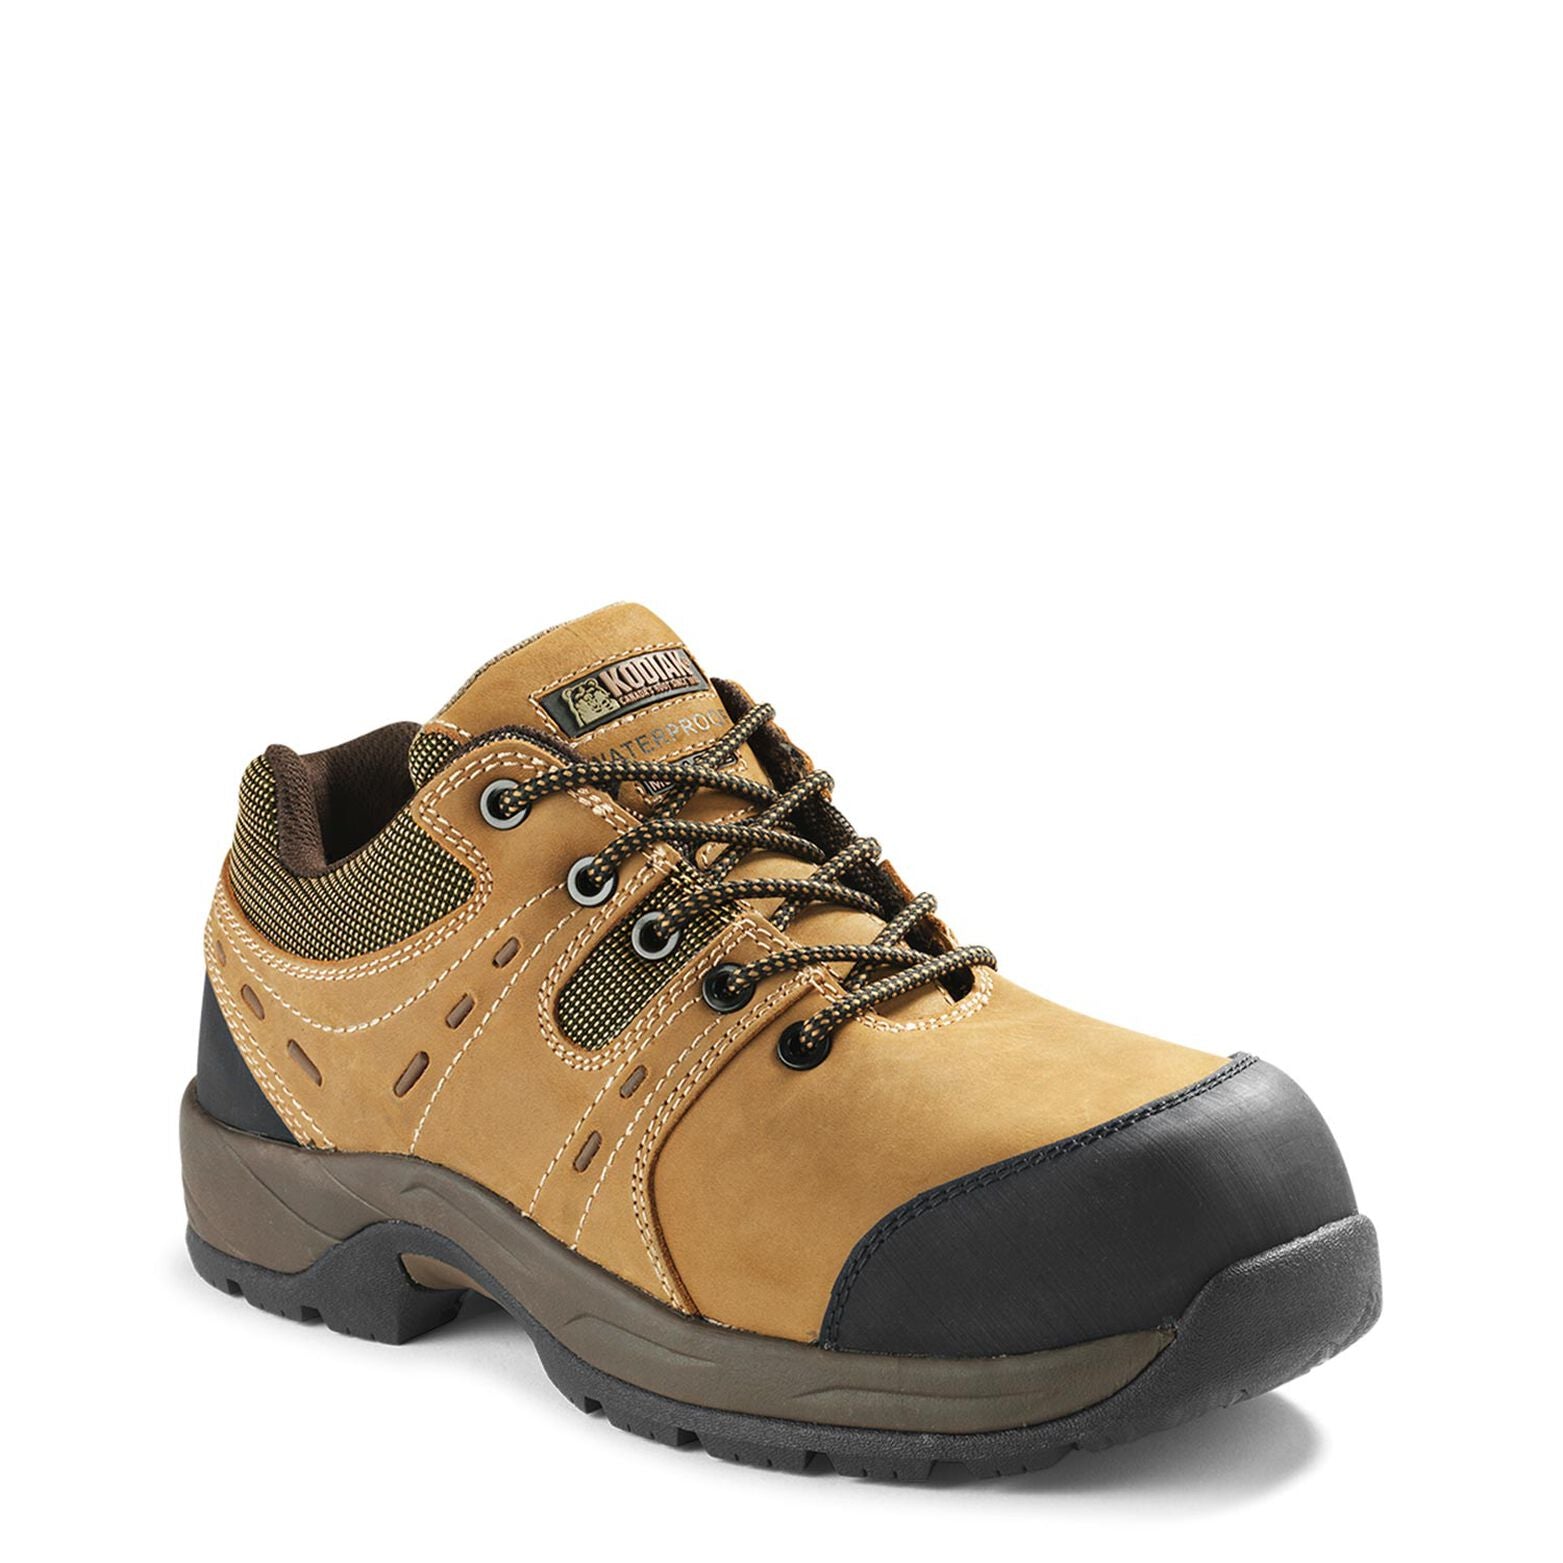 Kodiak Trail Men's Waterproof Leather Composite Toe Hiker Safety Work Shoes | Brown | Sizes 7 - 14 Work Boots - Cleanflow